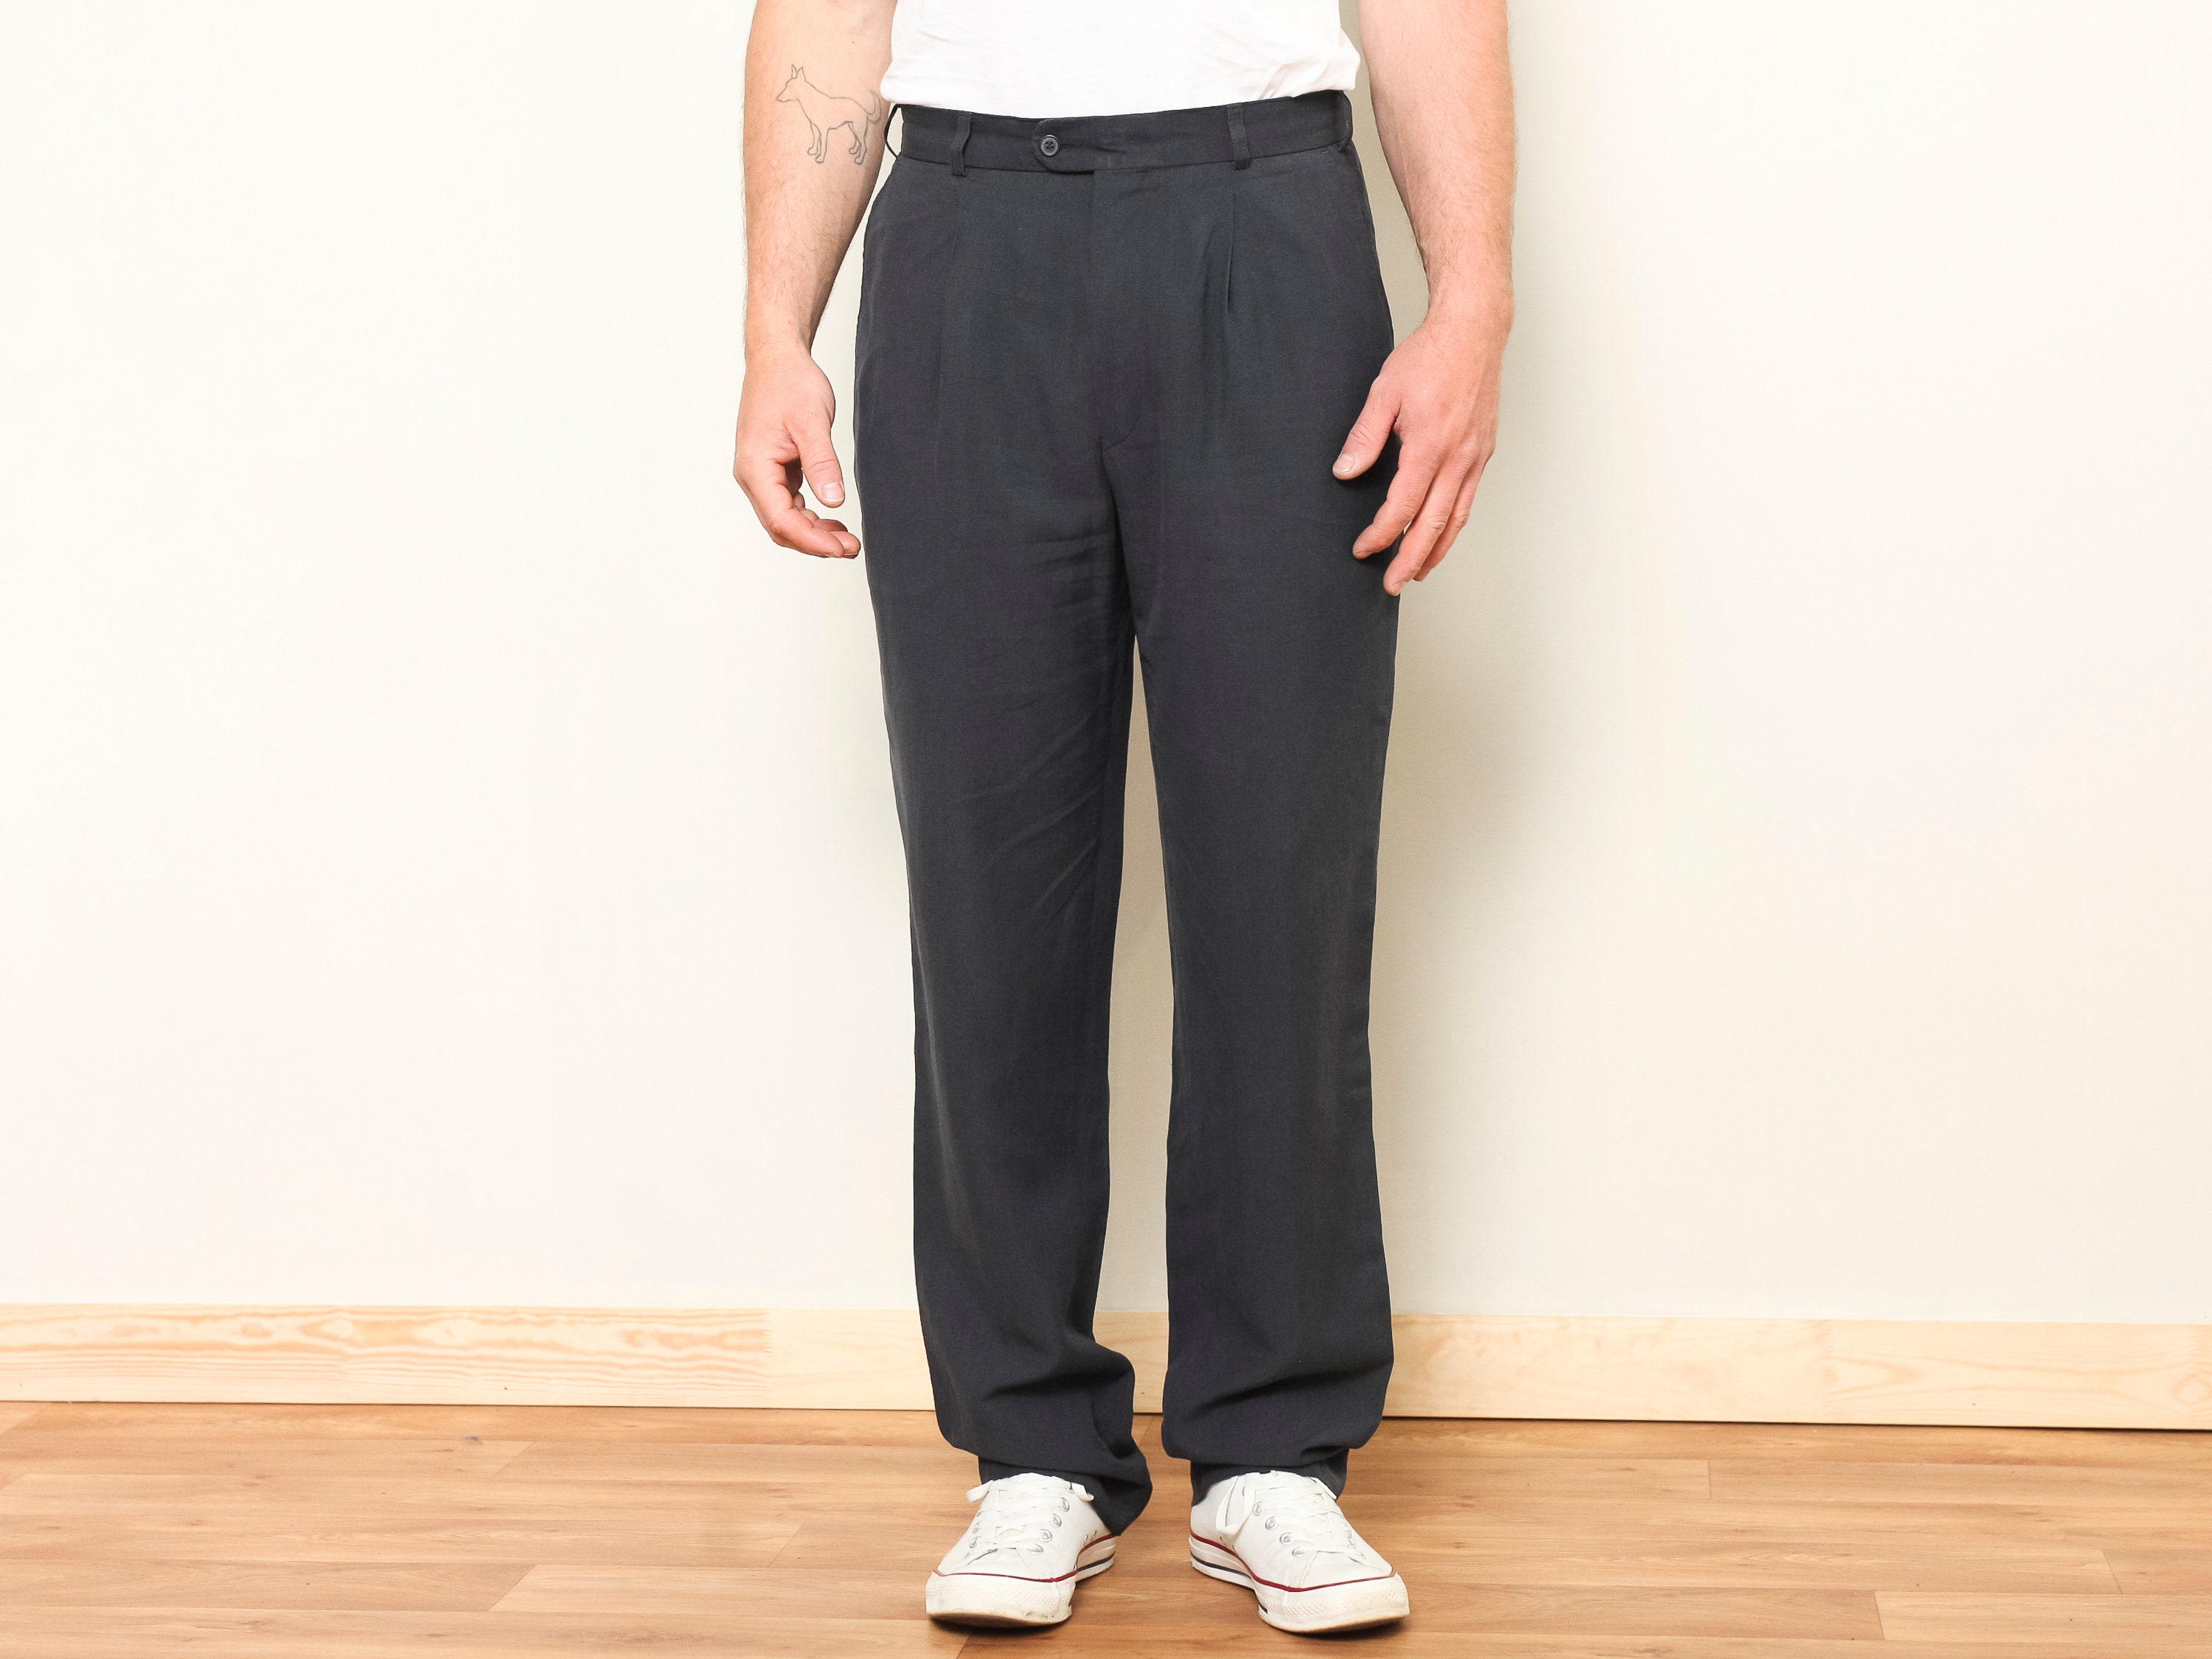 Our Legacy Sailor Wide-Leg Tailored Trousers - Black